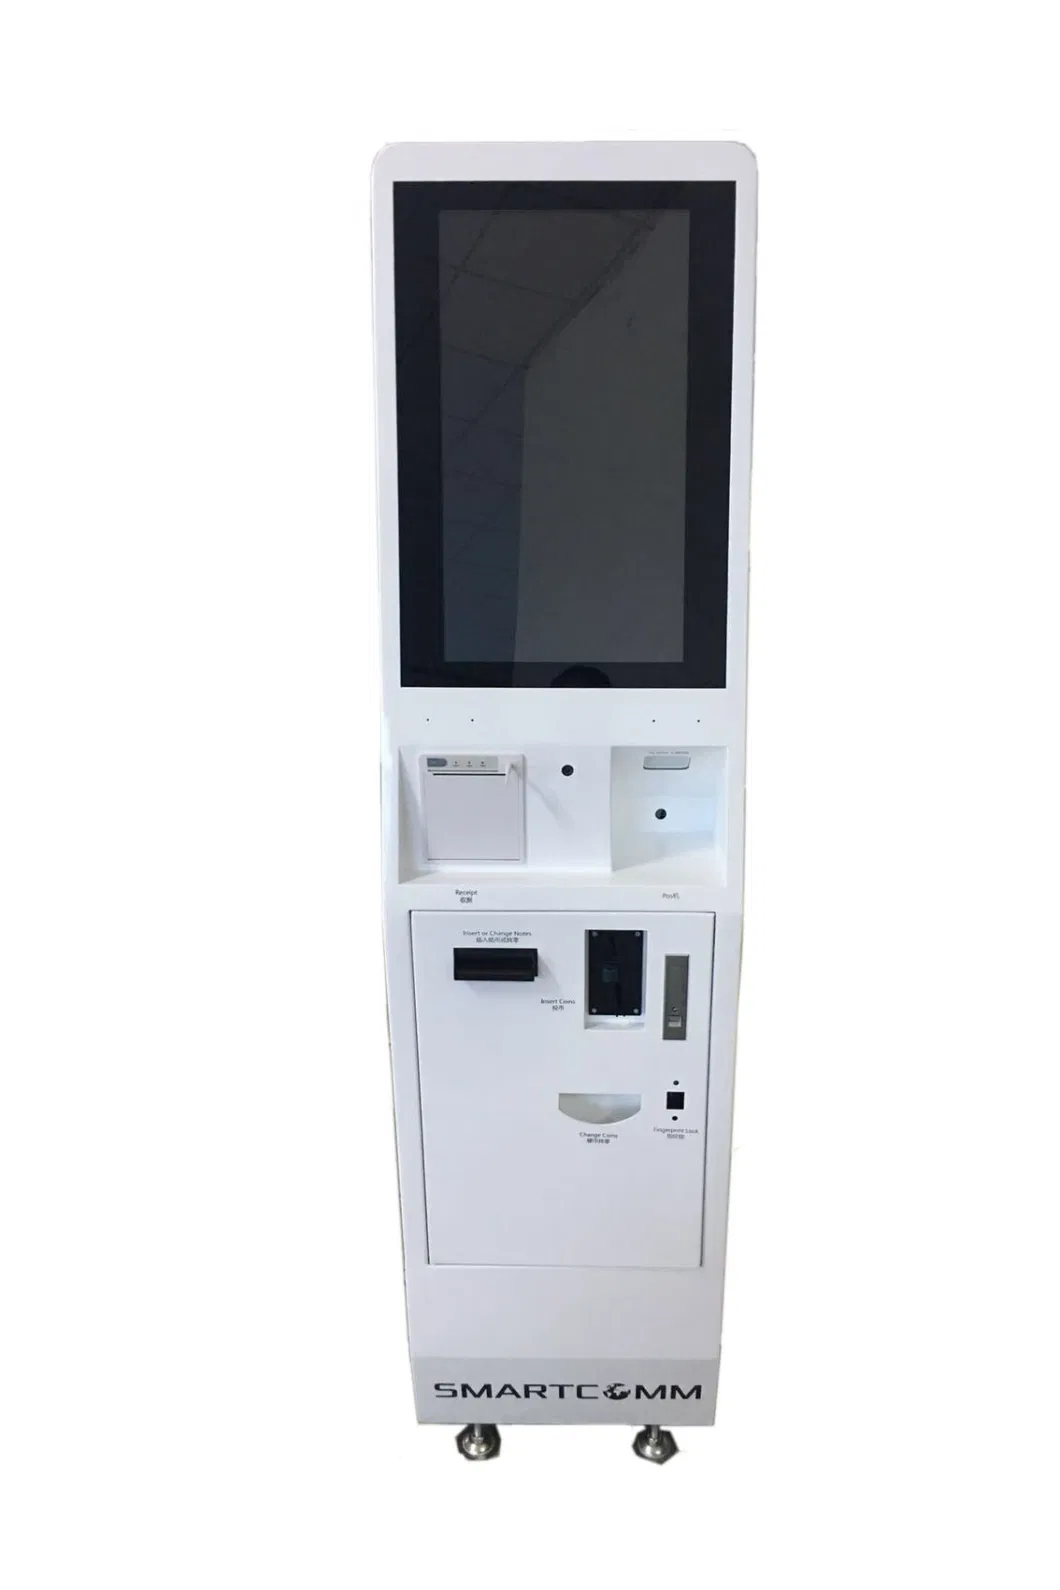 32 Inch Advertising Player LCD Display Digital Signage Order Food Ticket Vending Machine Self Service Bank Card Bill Payment Terminal Touch Screen Kiosk